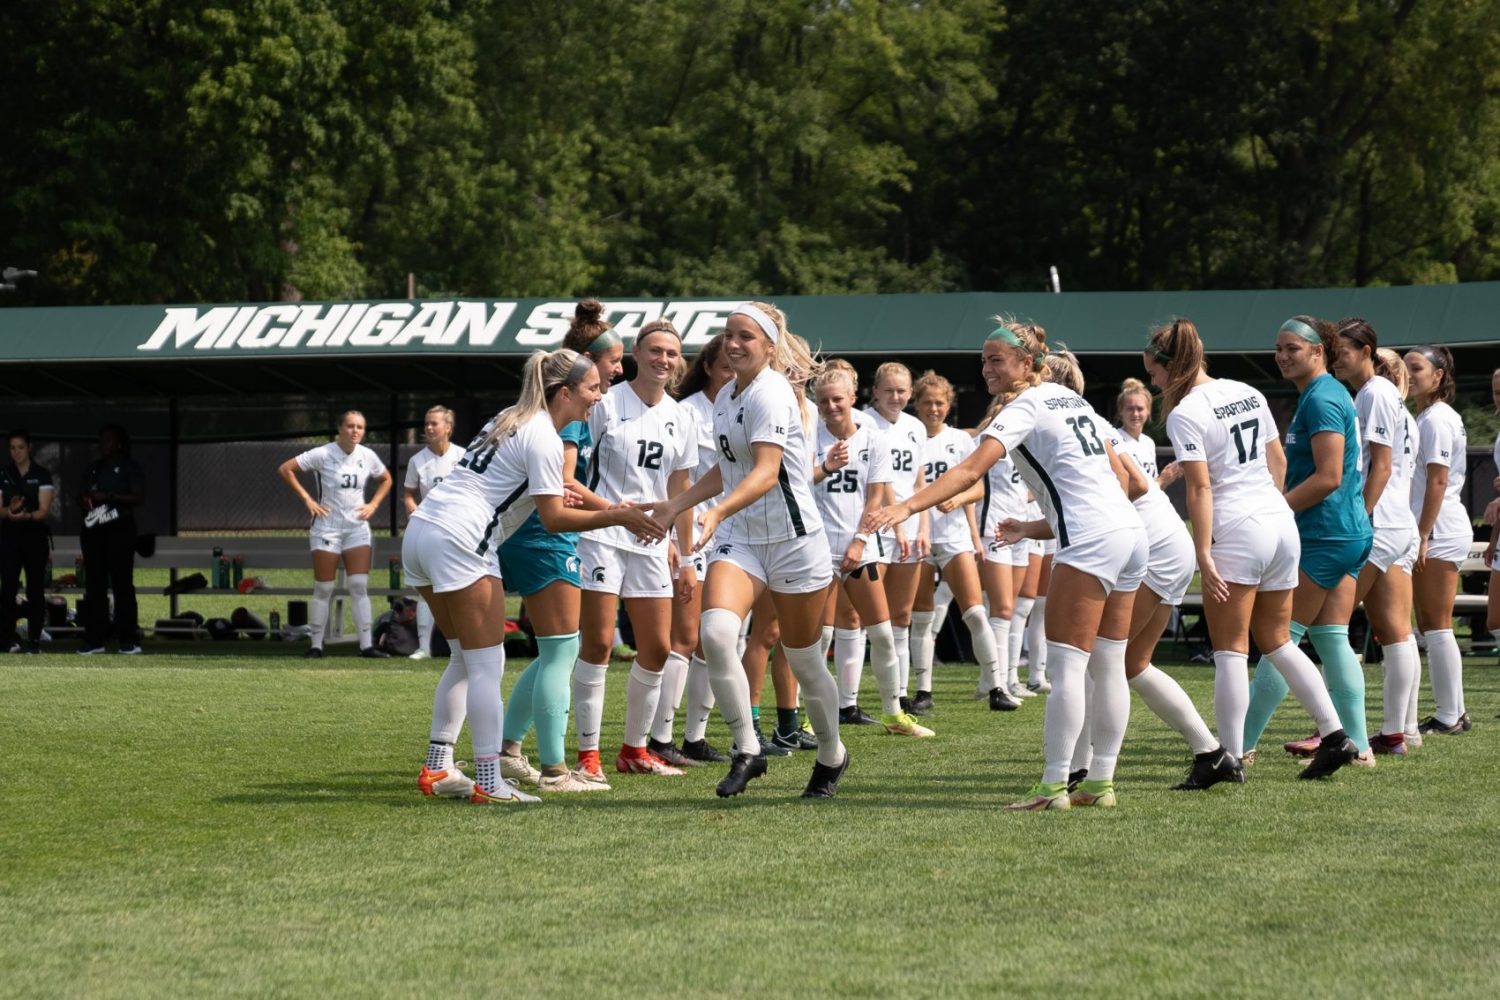 Raegan Cox stands out on defense for the Big Ten champion Michigan State women’s soccer team